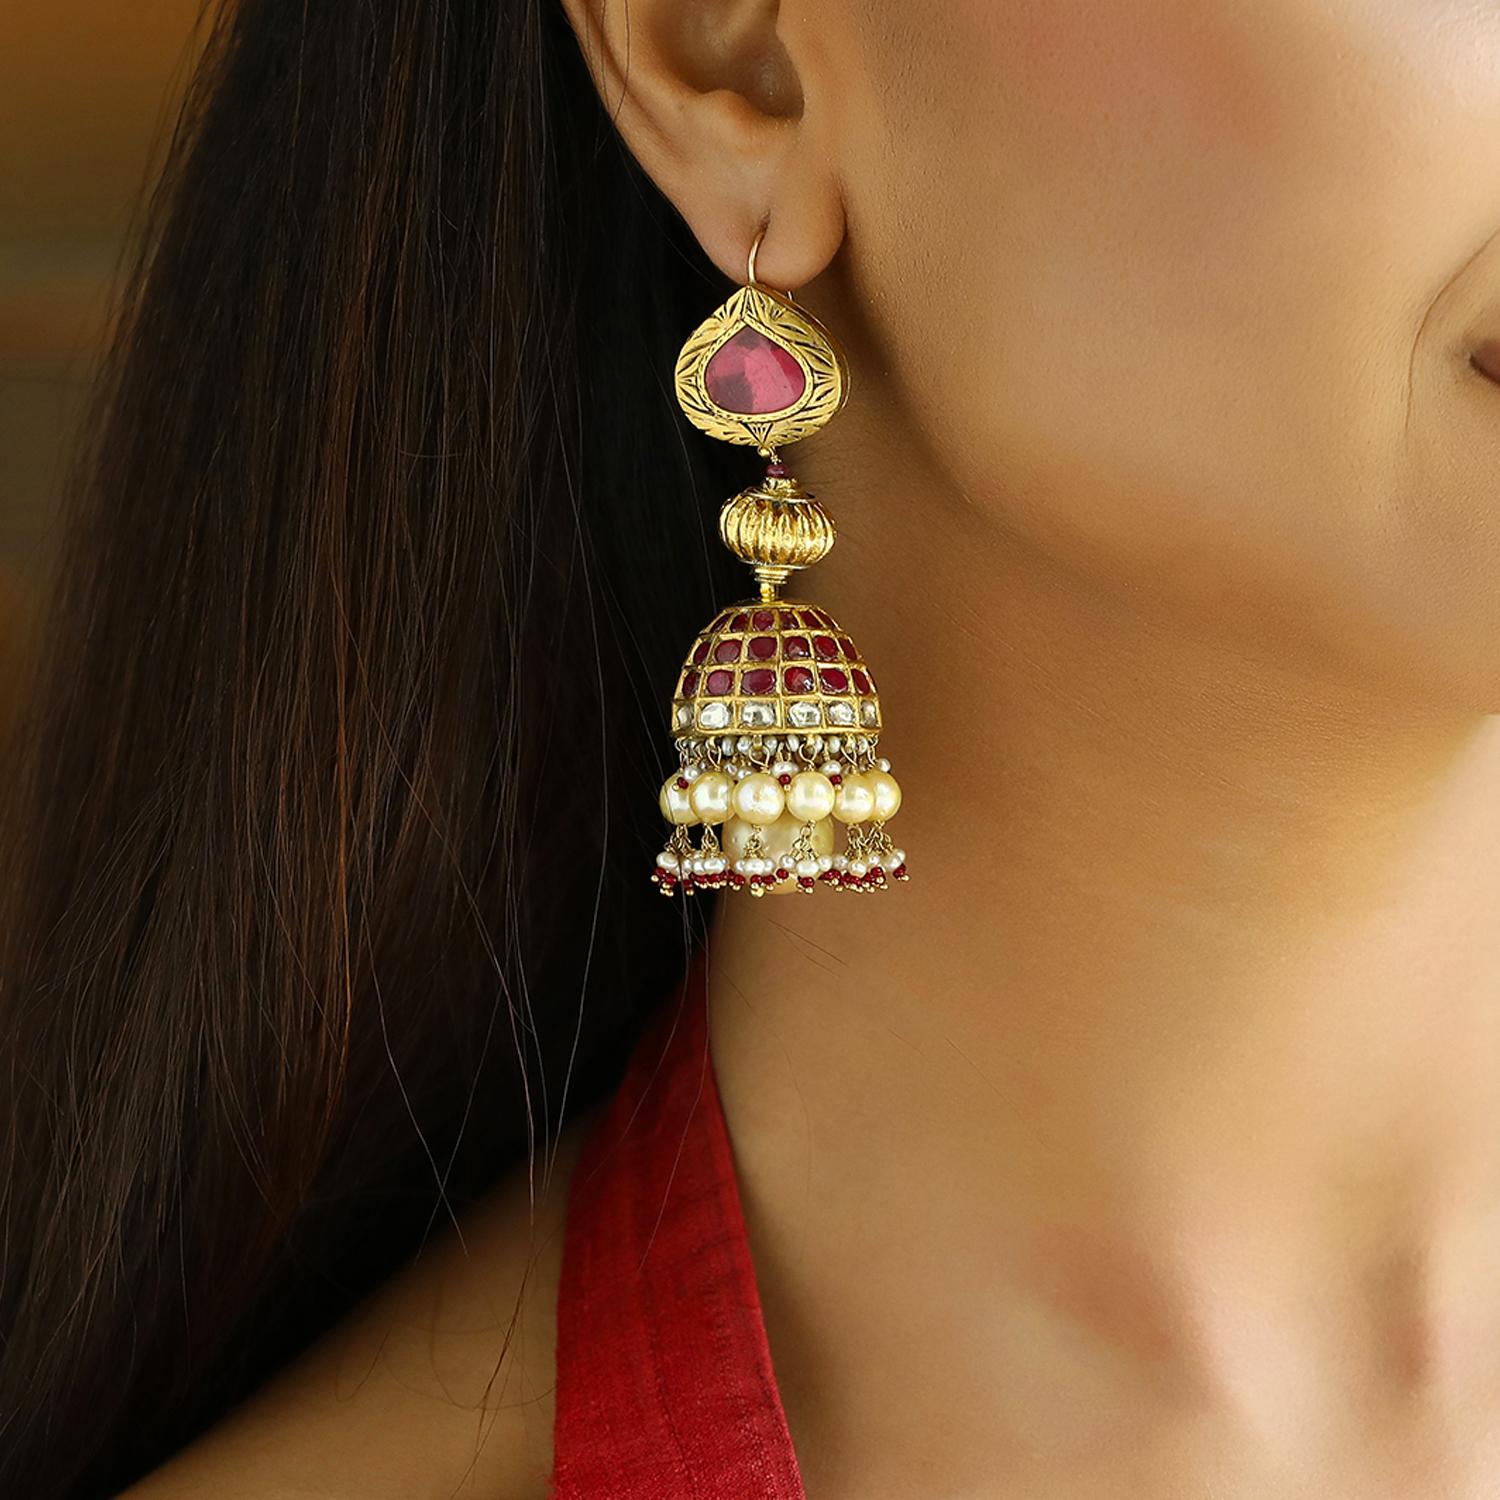 Artisan Lal pari jhumkas with rubies, pearls and polki by Vintage intention For Sale